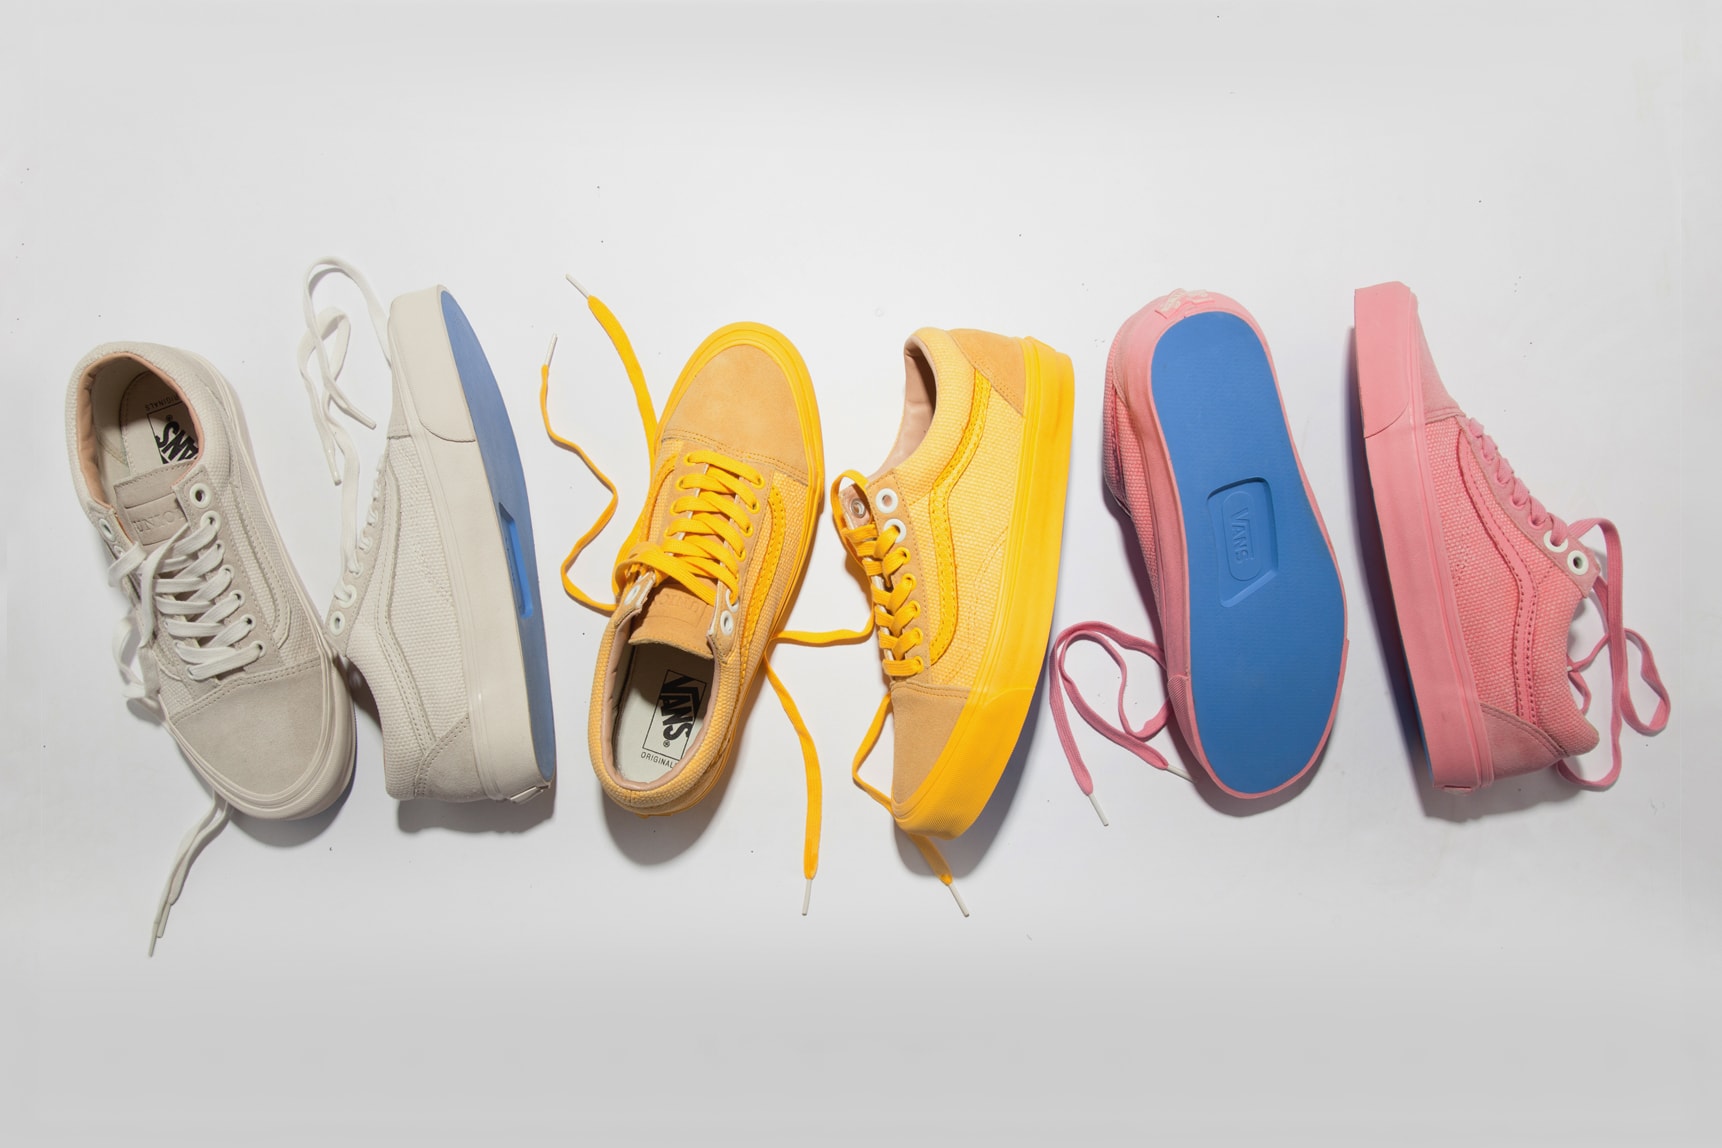 Union Los Angeles x Vans 'Old Skool' Collection